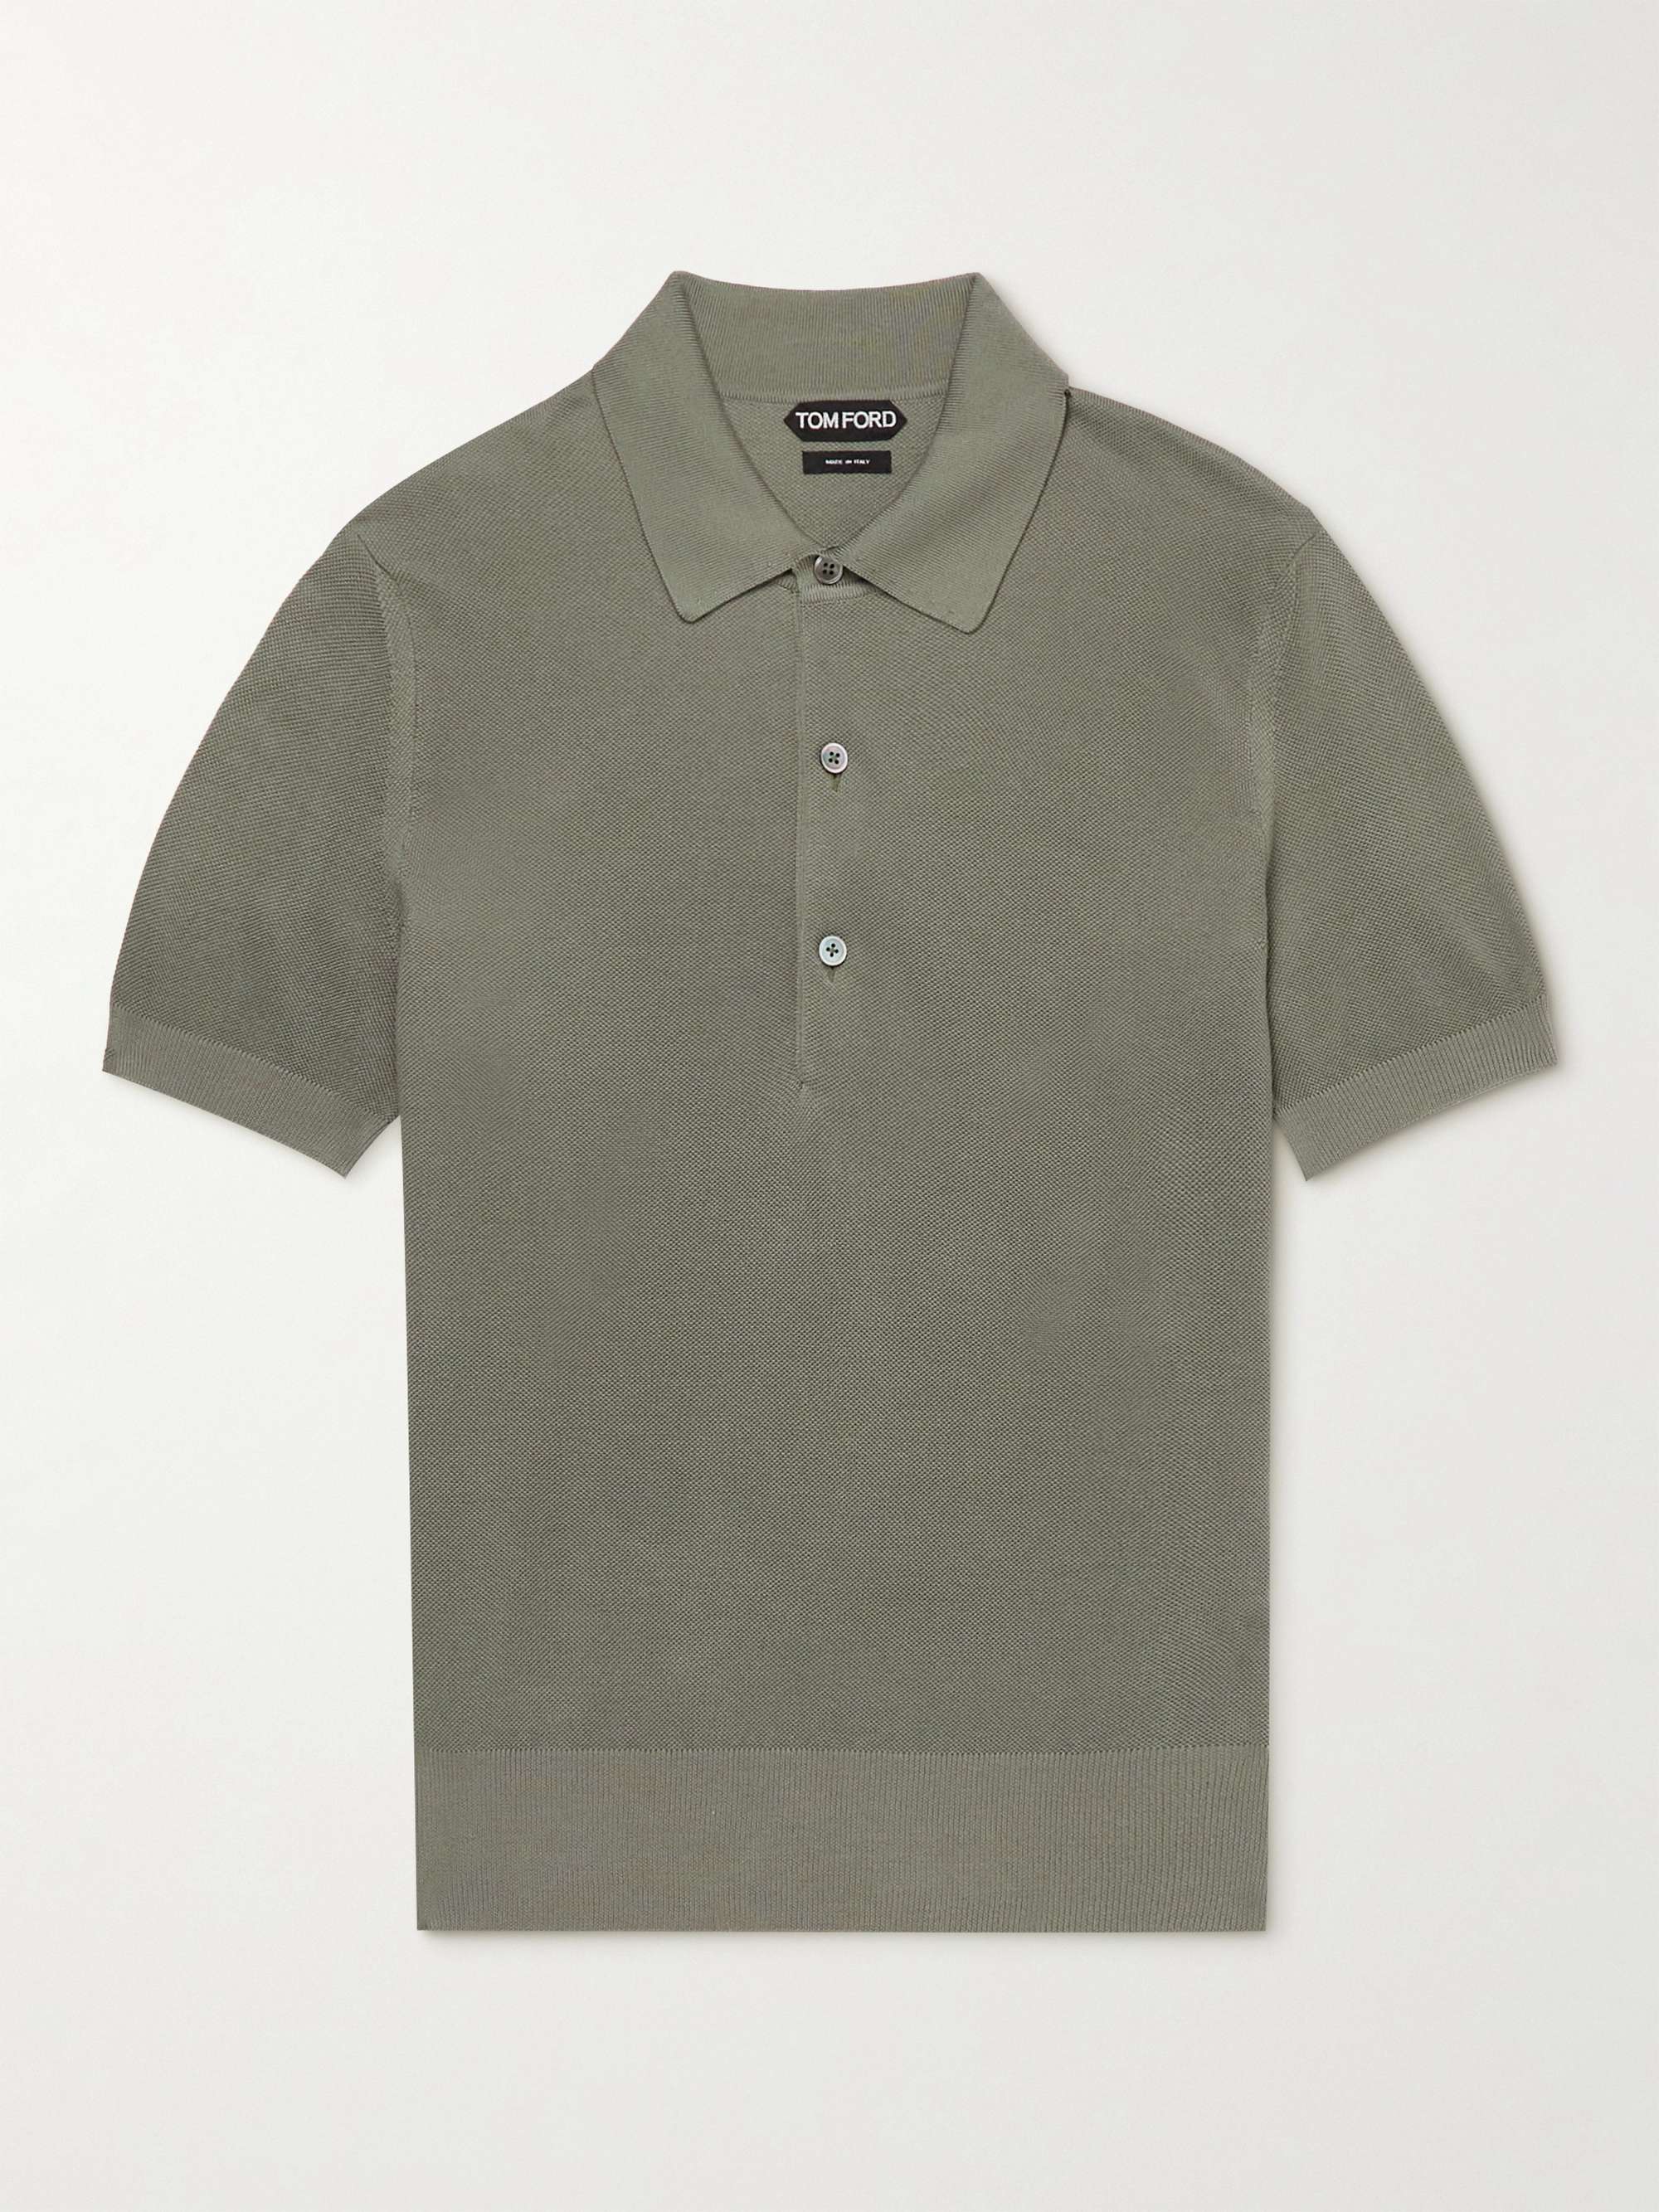 TOM FORD Honeycomb-Knit Silk and Cotton-Blend Polo Shirt for Men | MR PORTER